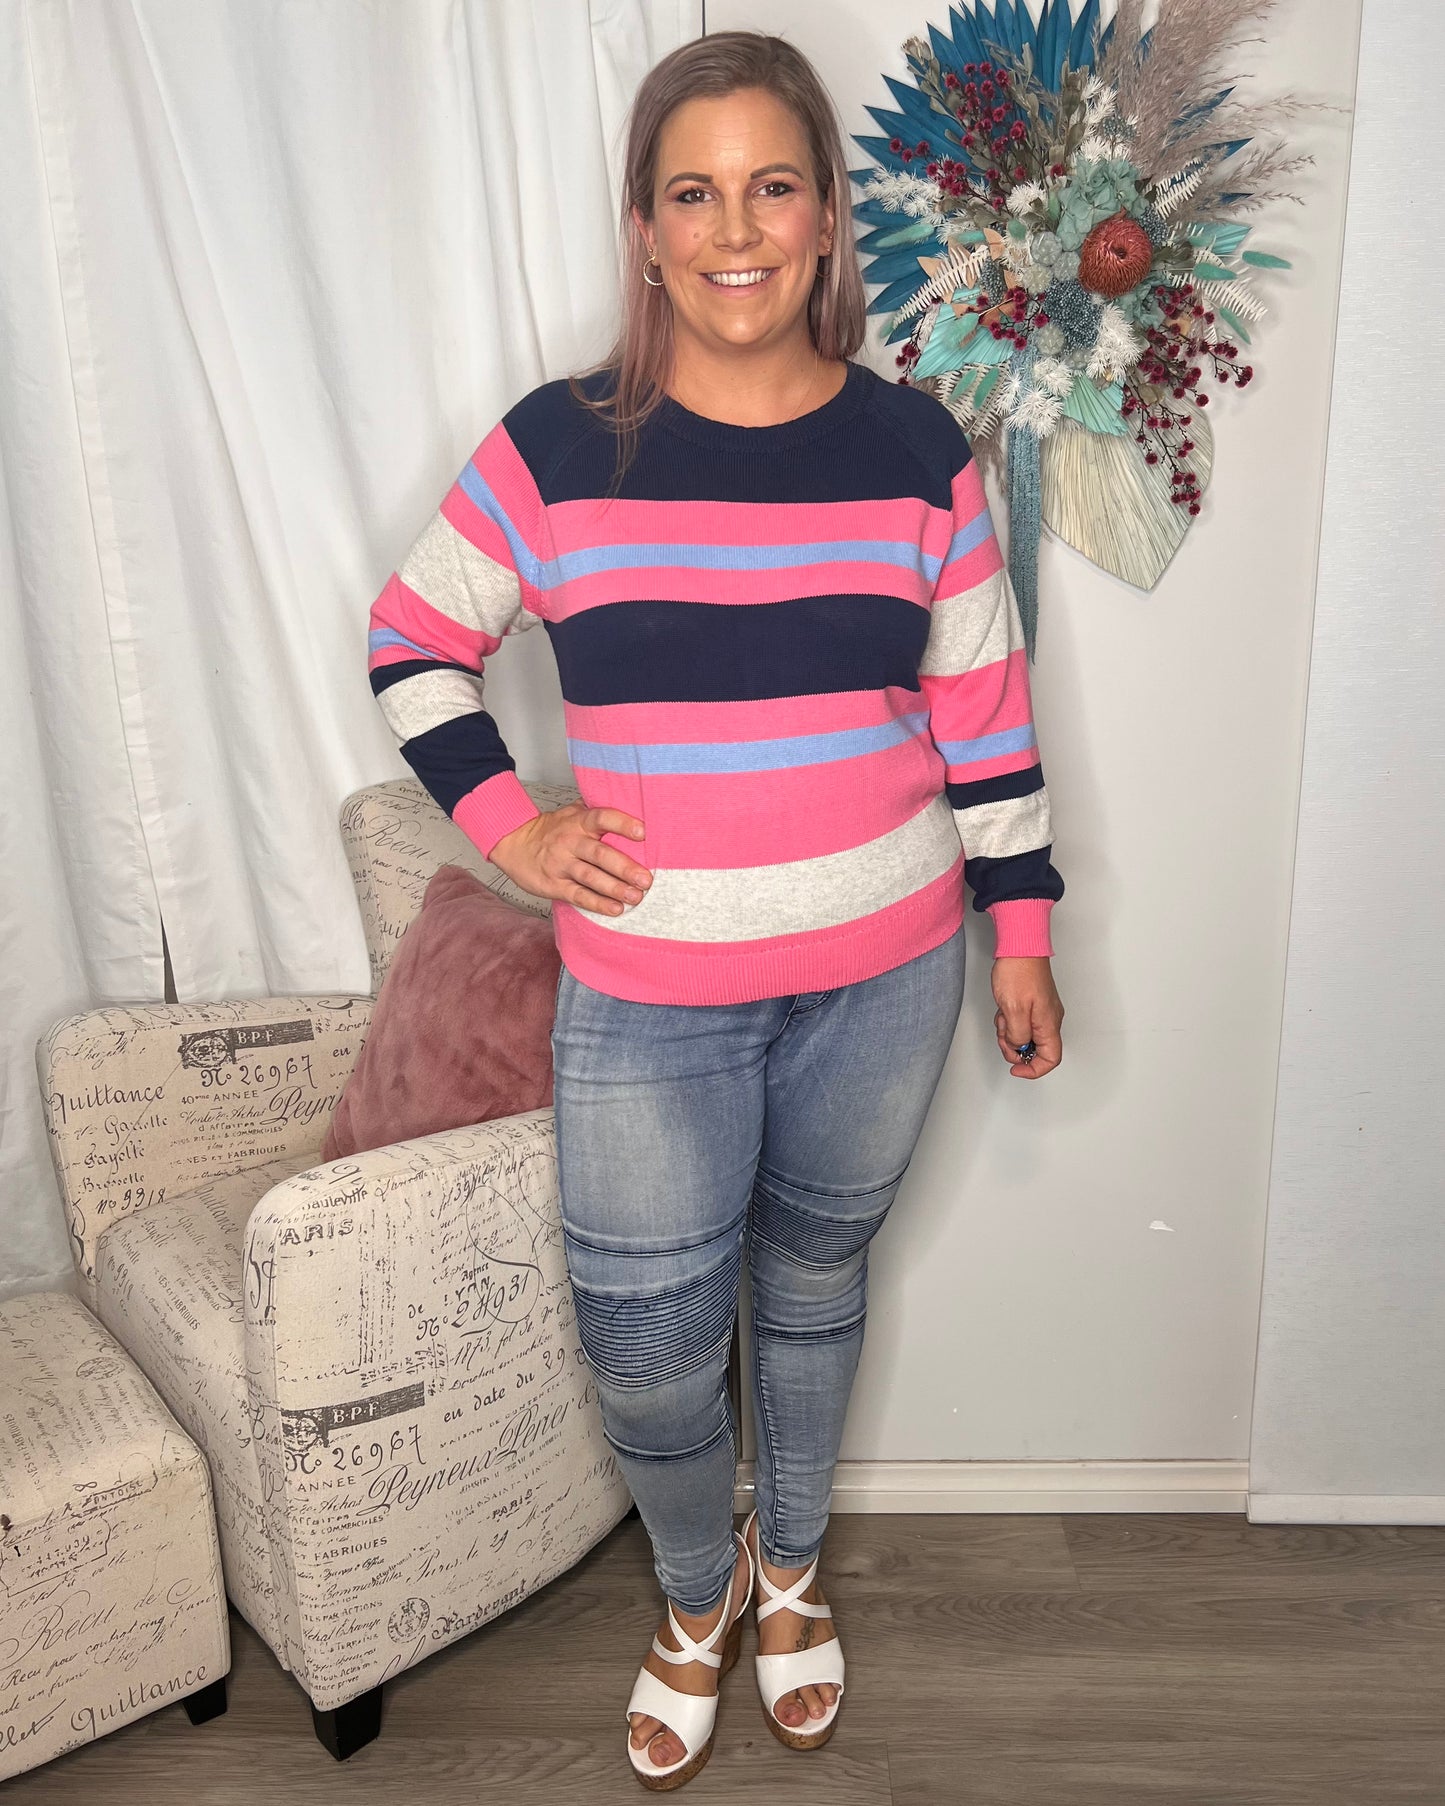 Cherie Knit - Navy Pink Colourblock: This super cute light knit is perfect for those in between days where you're not sure if you are hot or cold!
Features:

Short length
Fitted sleeves with ribbed cuff - Ciao Bella Dresses 